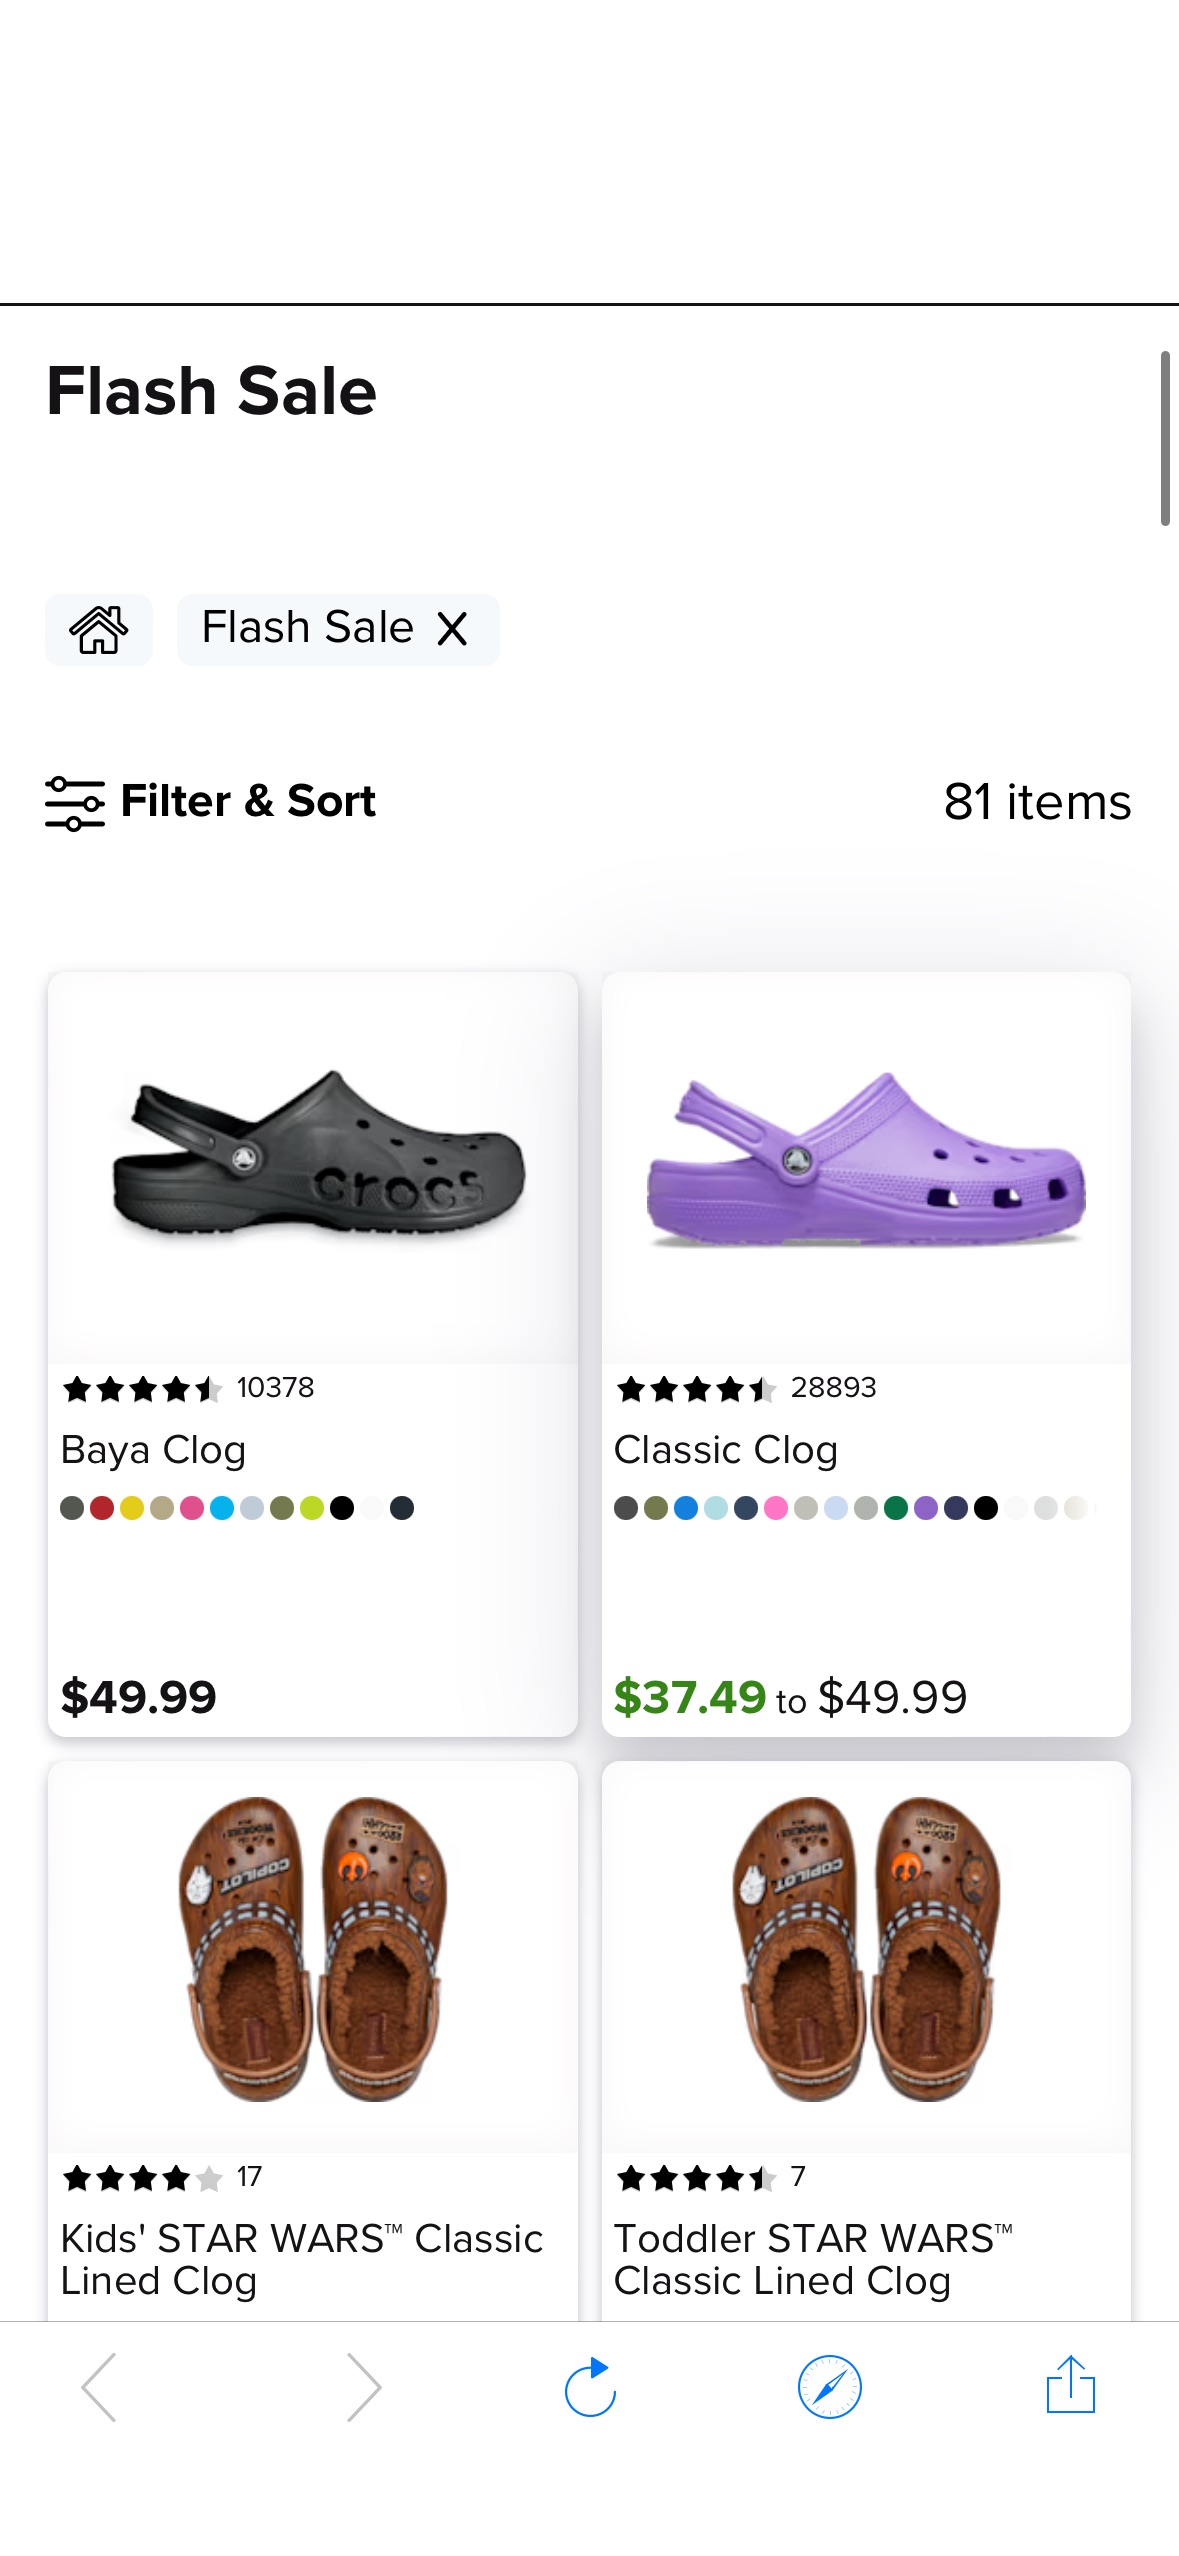 Crocs 2 for $50 Flash Sale is Back! Add two select pairs to your cart, and the discount will be applied automatically at checkout. Make sure to look for the wording “2 for $50 on select styles and col